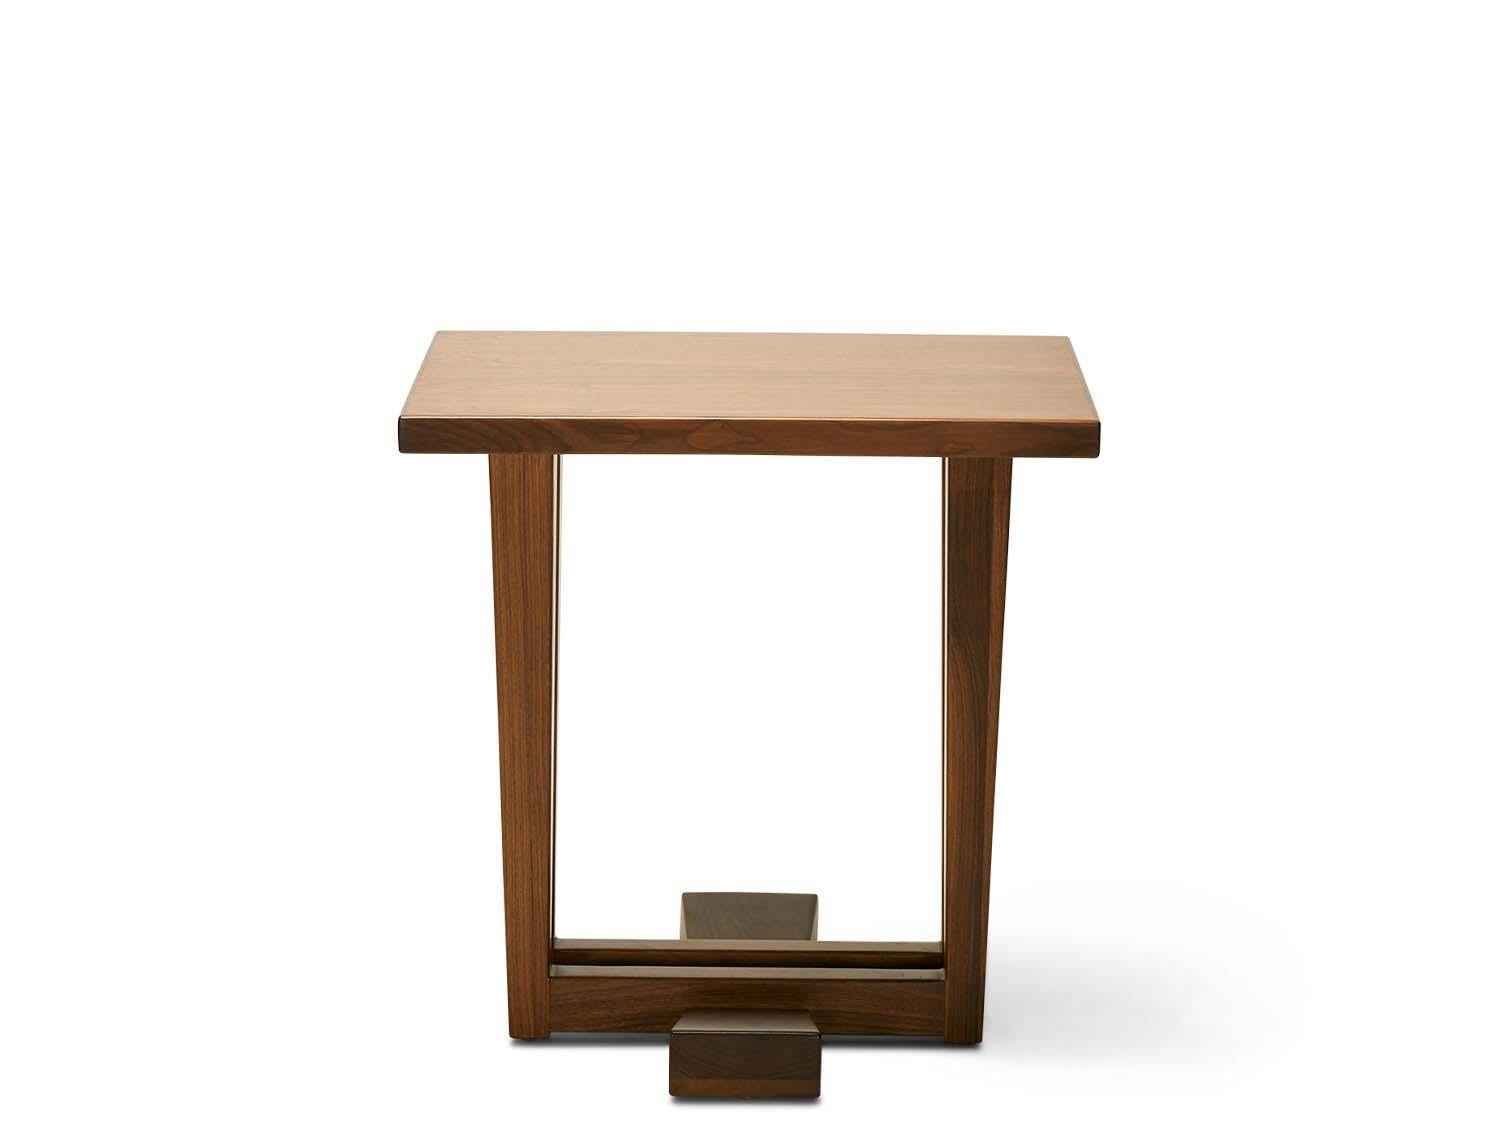 The Rialto side table - XL is made from American walnut or white oak and features an architectural base.

The Lawson-Fenning Collection is designed and handmade in Los Angeles, California. Reach out to discover what options are currently in stock.